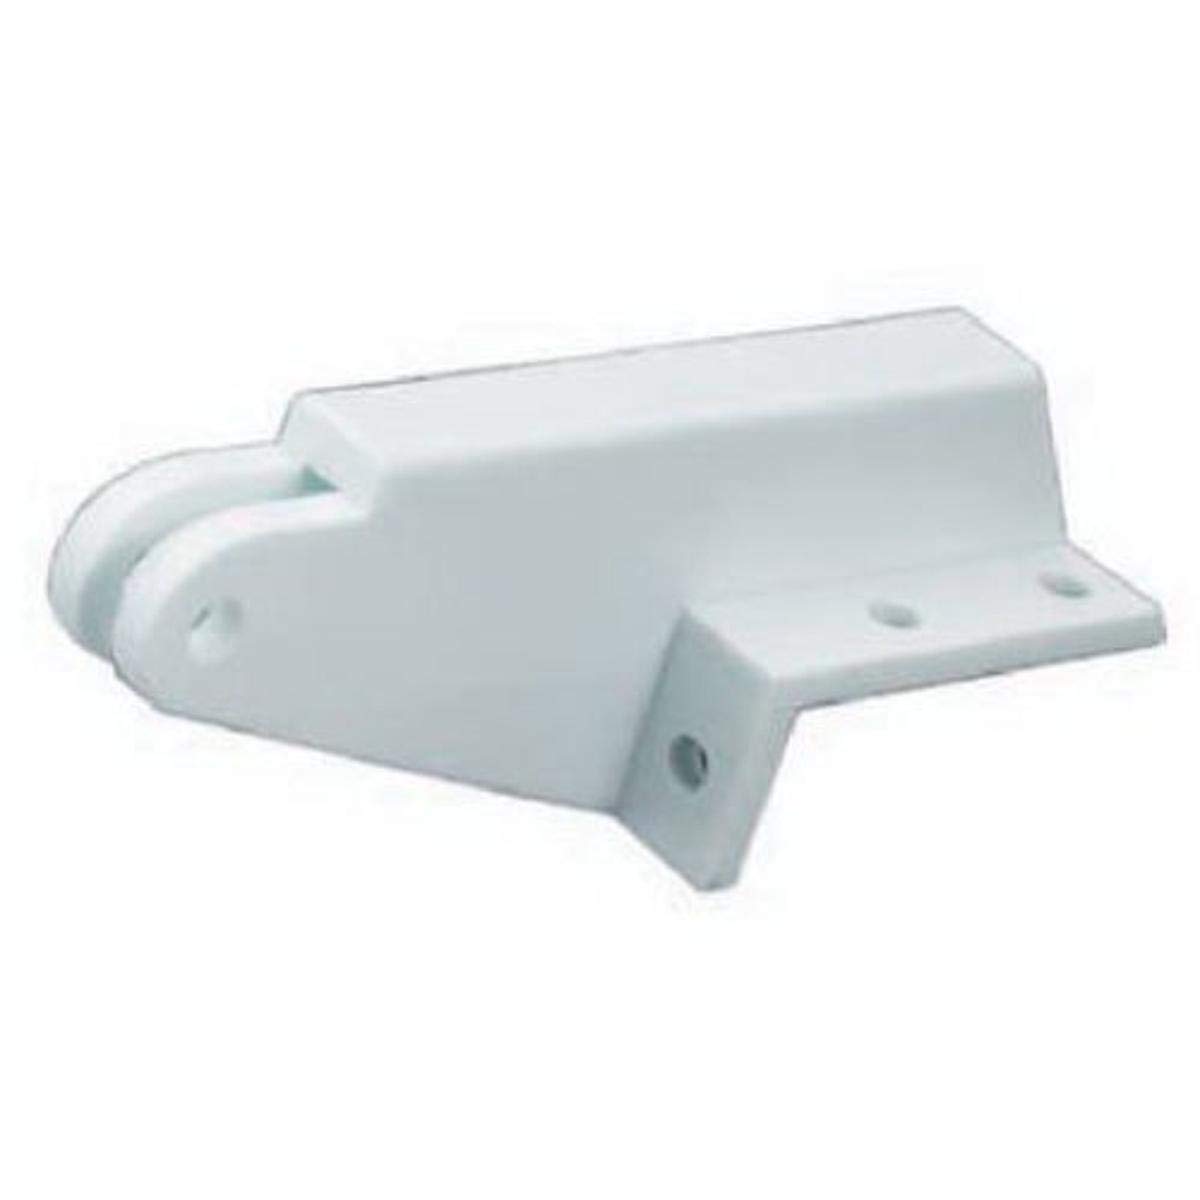 Wright Products Replacement Jamb Bracket for Lanai Screen Door Closers (White) $3.29 + Free Shipping w/ Prime or on $25+